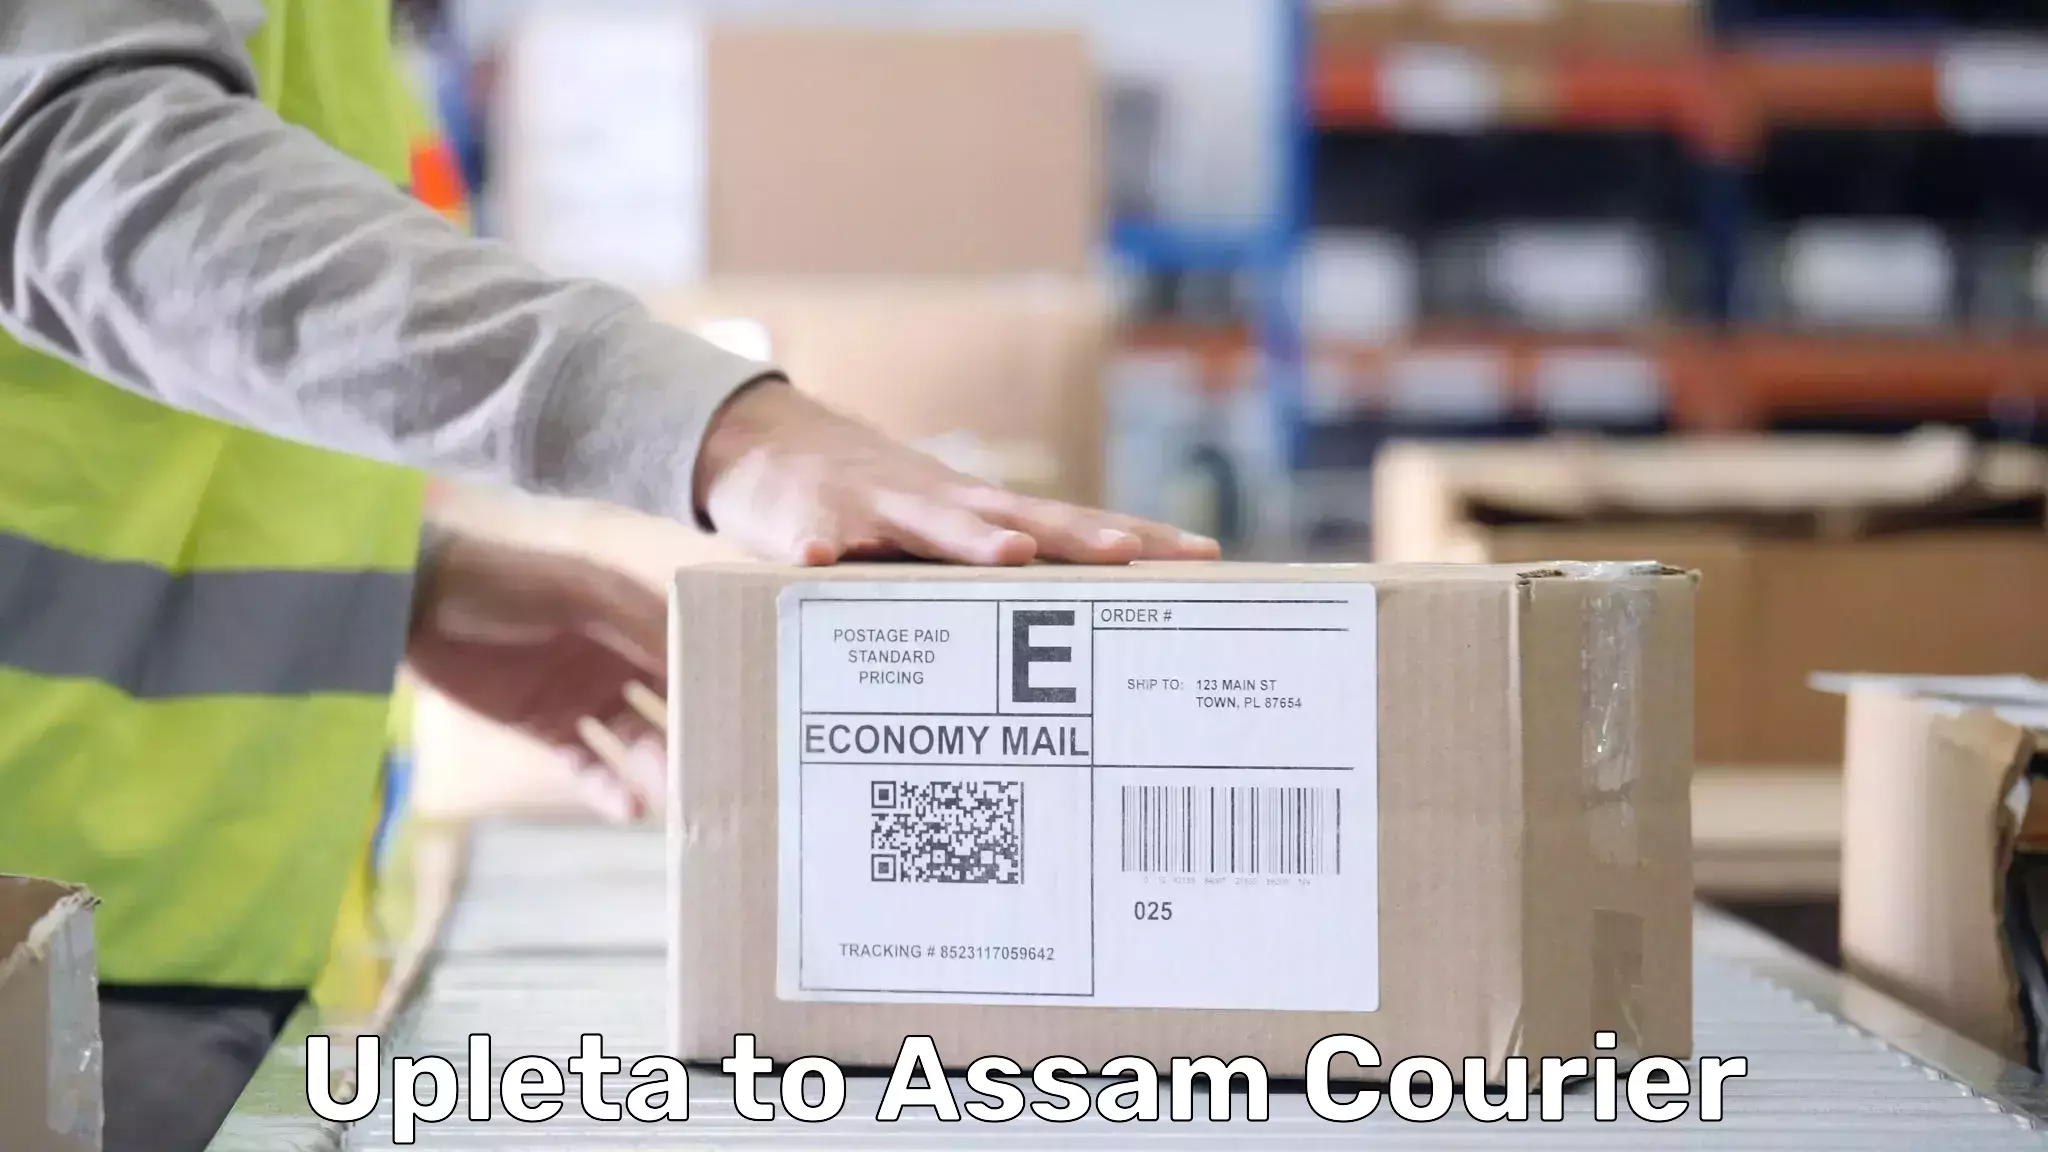 Baggage relocation service Upleta to Assam